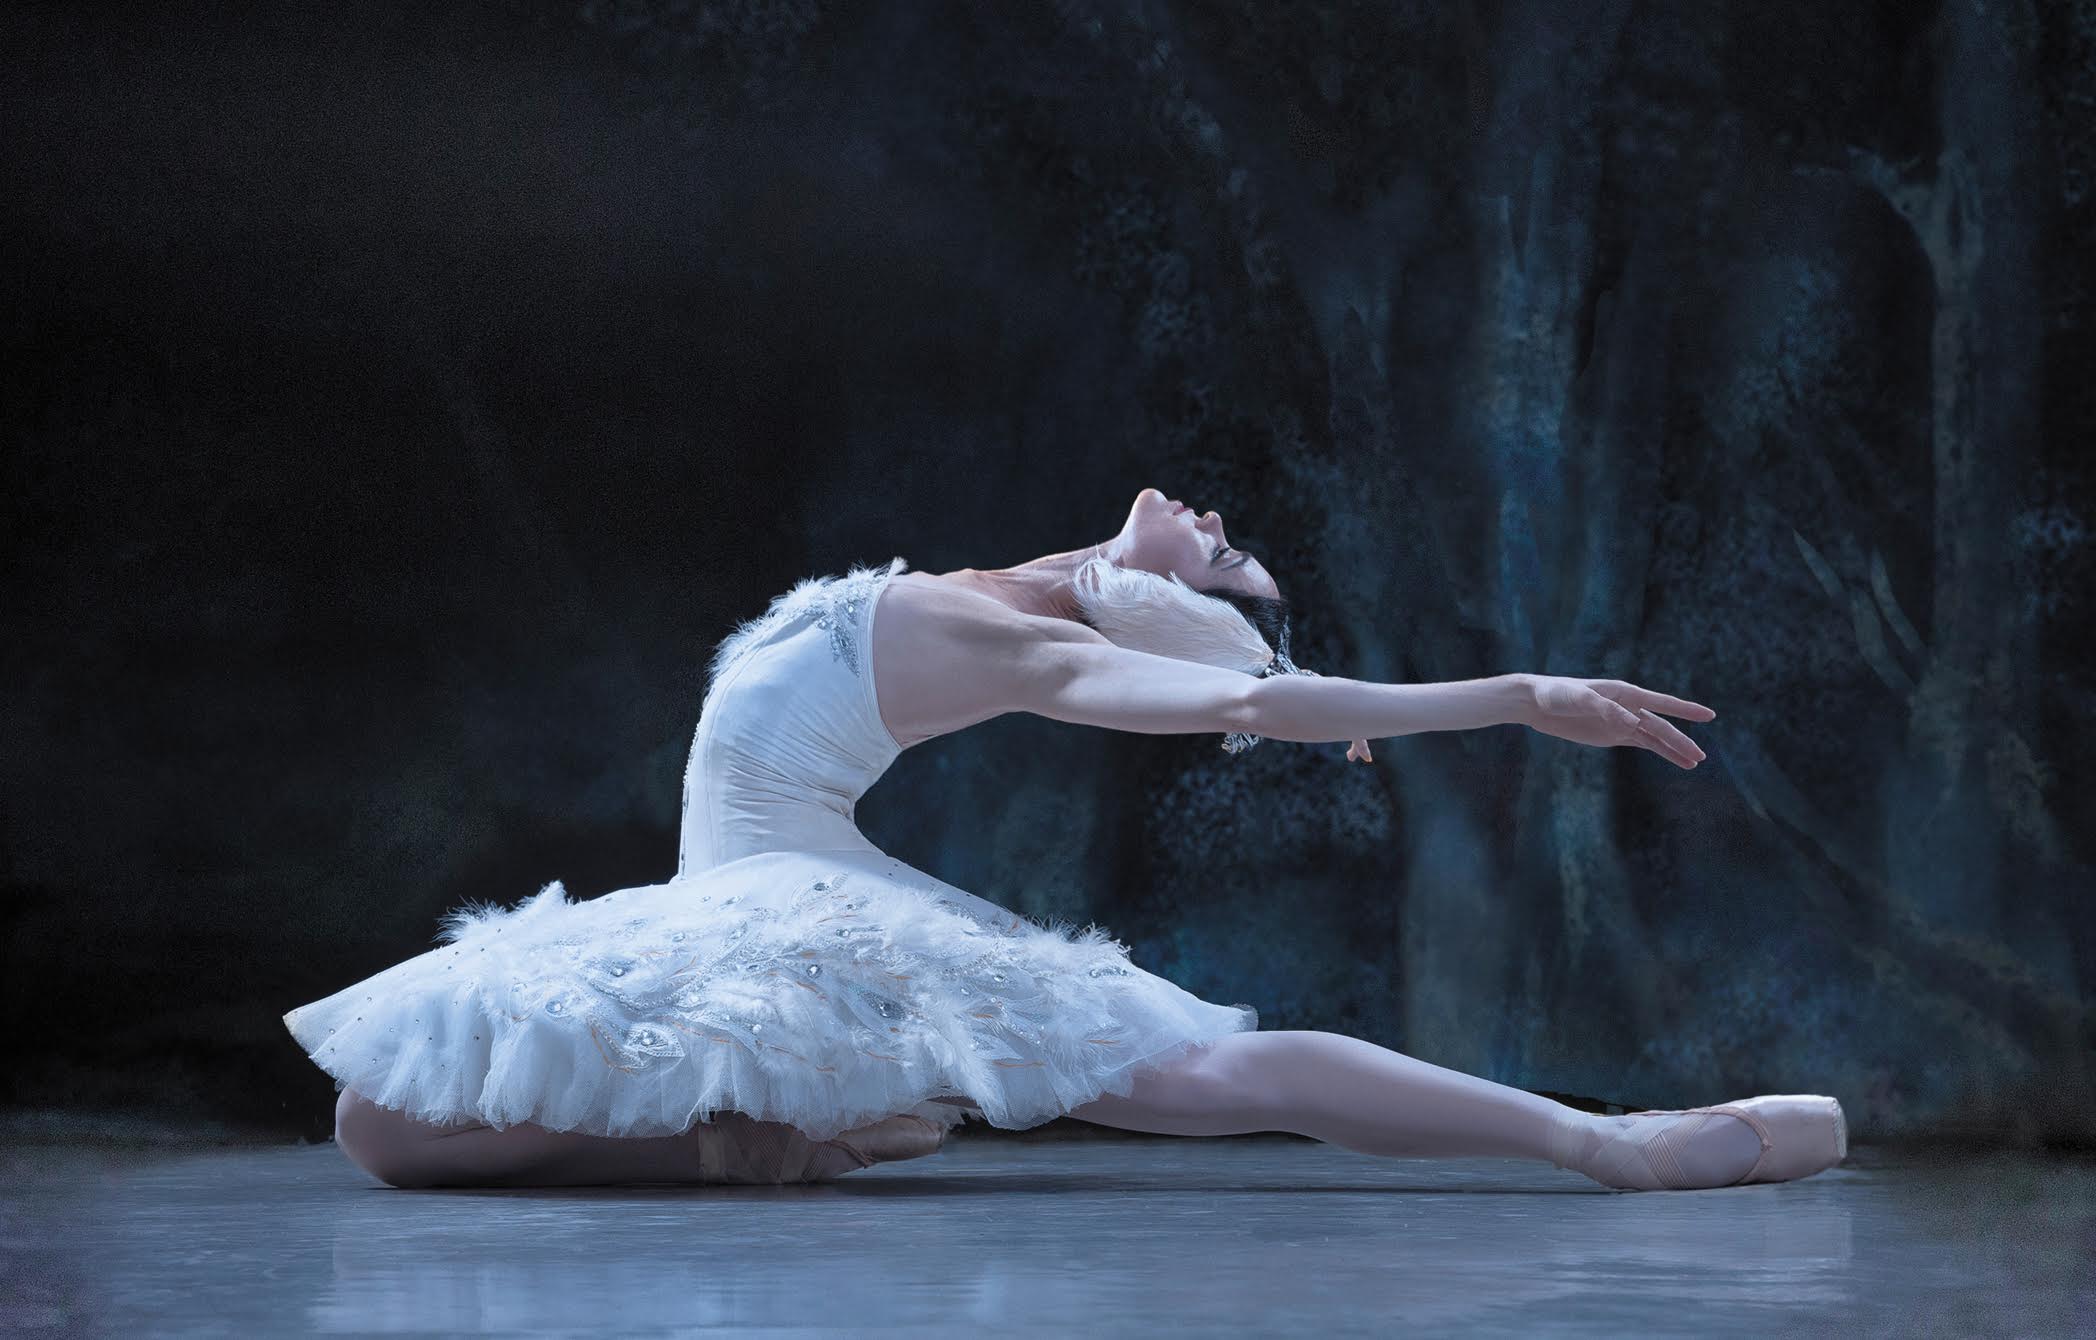 Swan Lake tells the story of an enchanted love between a swan maiden and a ...